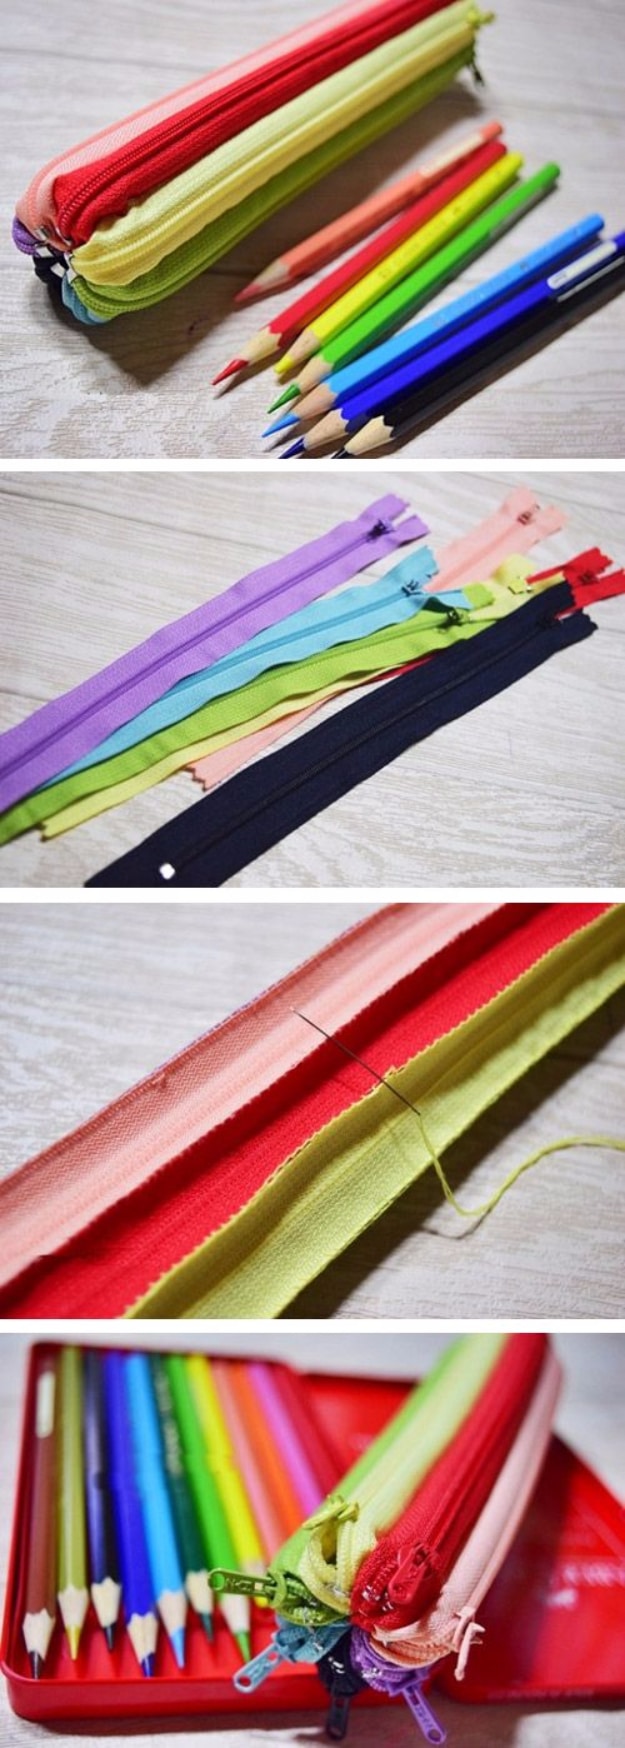 Creative DIY Projects With Zippers - Zipper Pencil Case - Easy Crafts and Fashion Ideas With A Zipper - Jewelry, Home Decor, School Supplies and DIY Gift Ideas - Quick DIYs for Fun Weekend Projects 